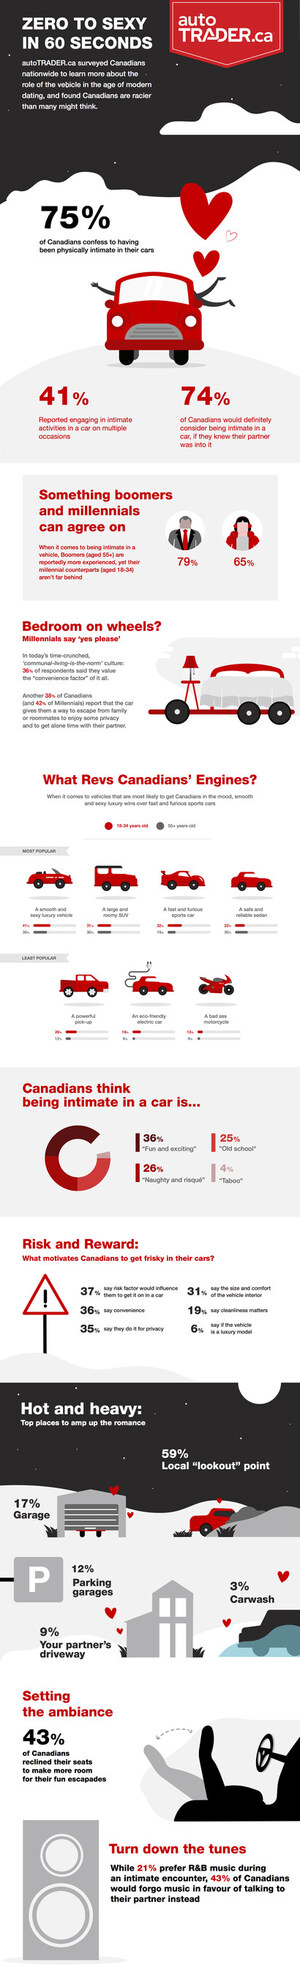 Zero to Sexy in 60 Seconds: Canadians revving more than their engines, study says